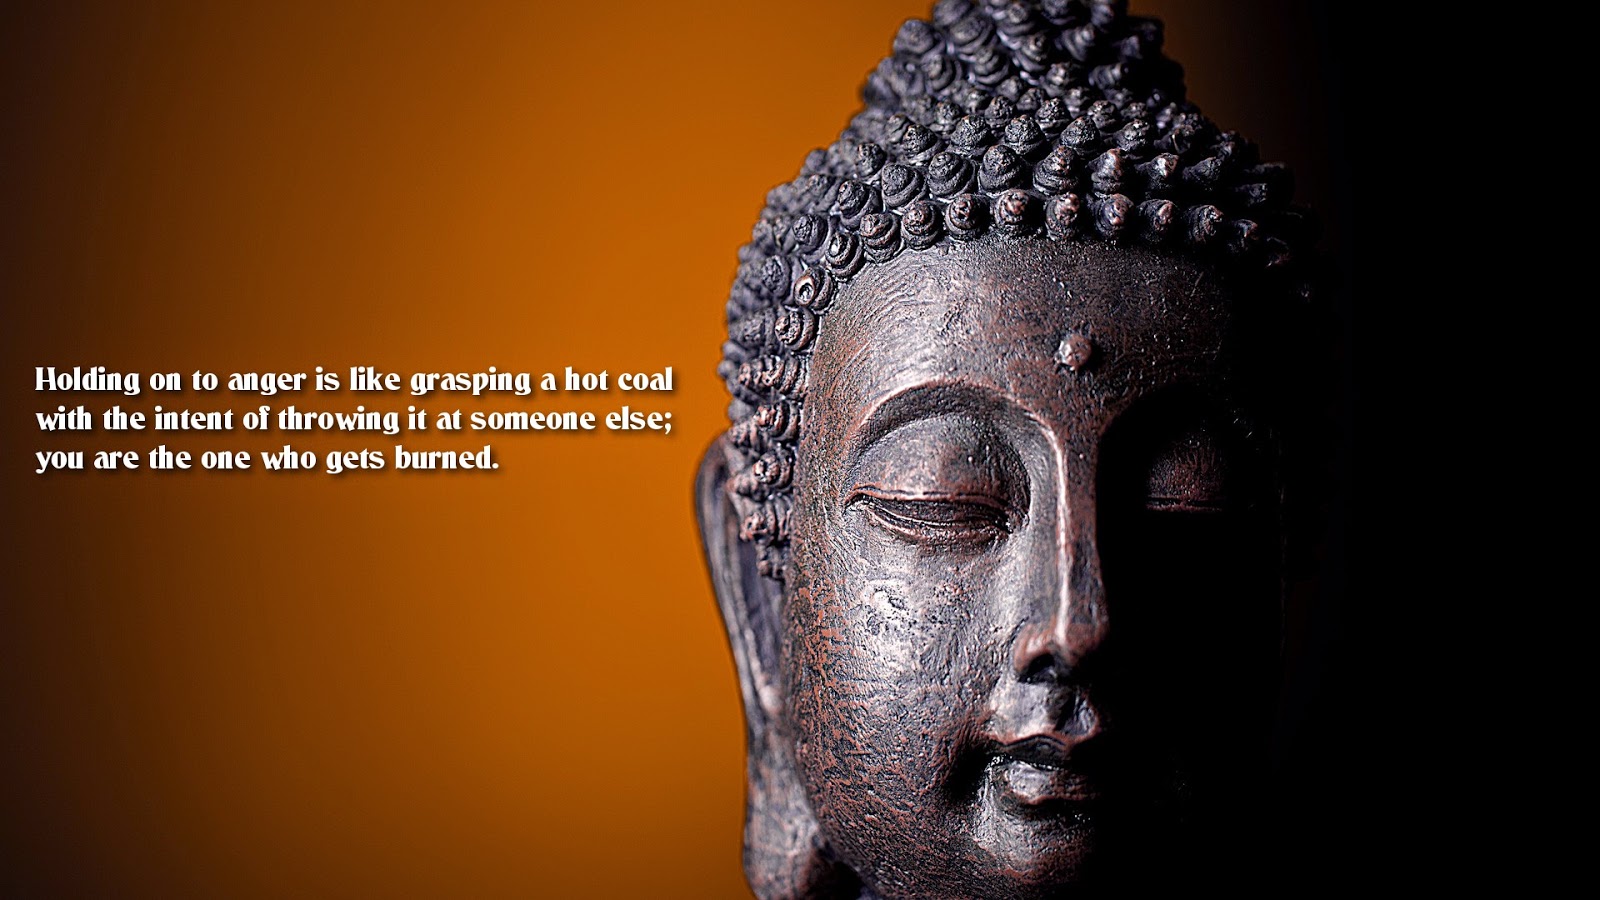 Buddha wallpapers with quotes on life and happiness HD